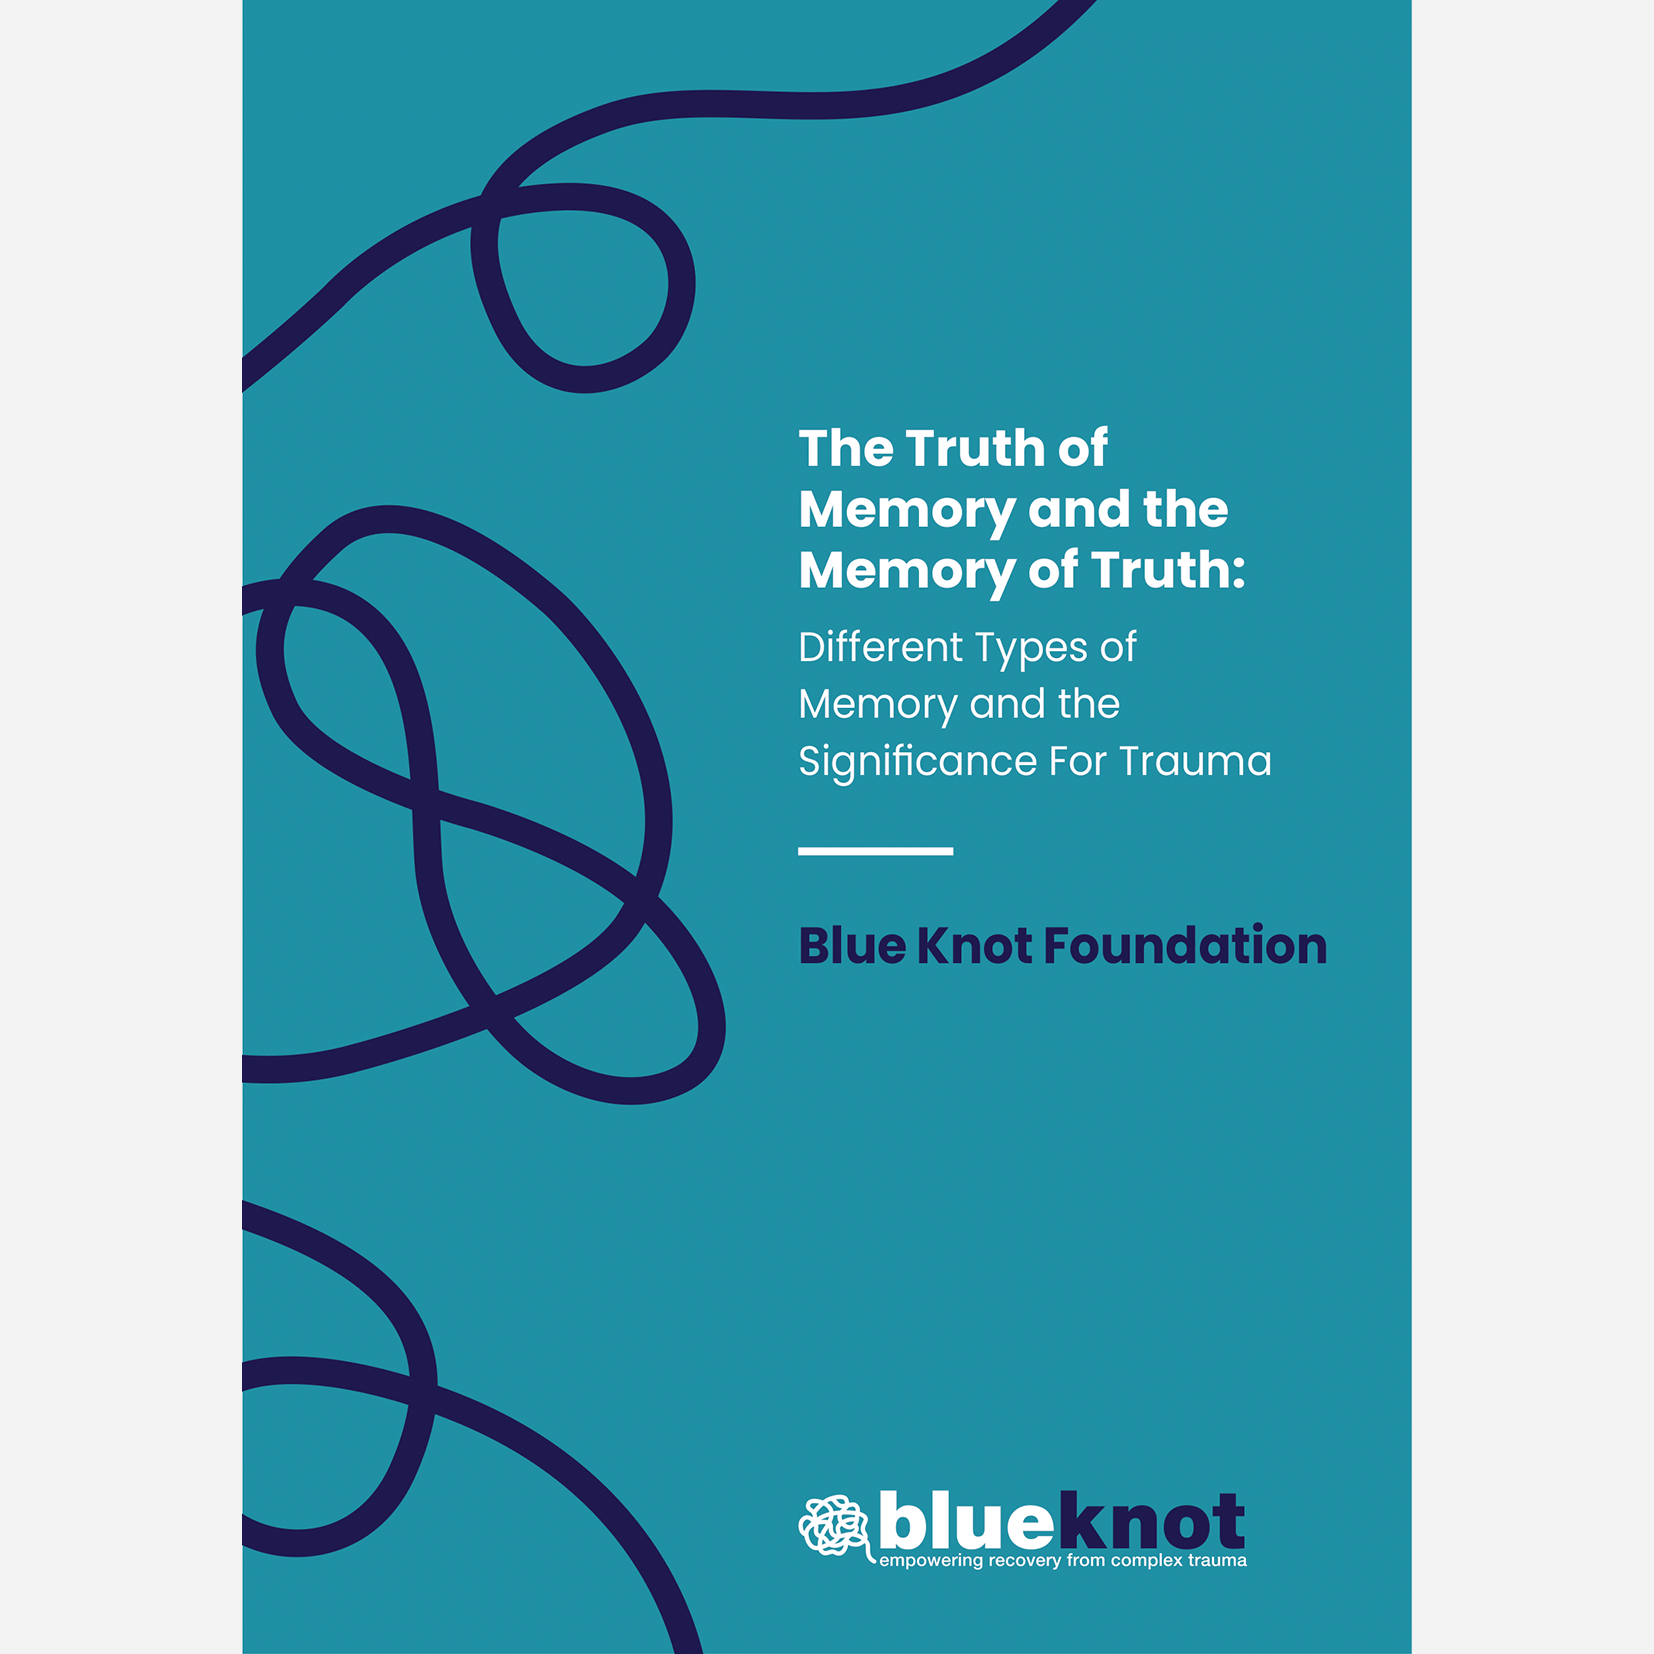 Different　Truth　and　of　of　The　and　Memory　Knot　Truth　Printed　Blue　of　of　Types　the　Trauma　Memory　Memory　Significance　Foundation